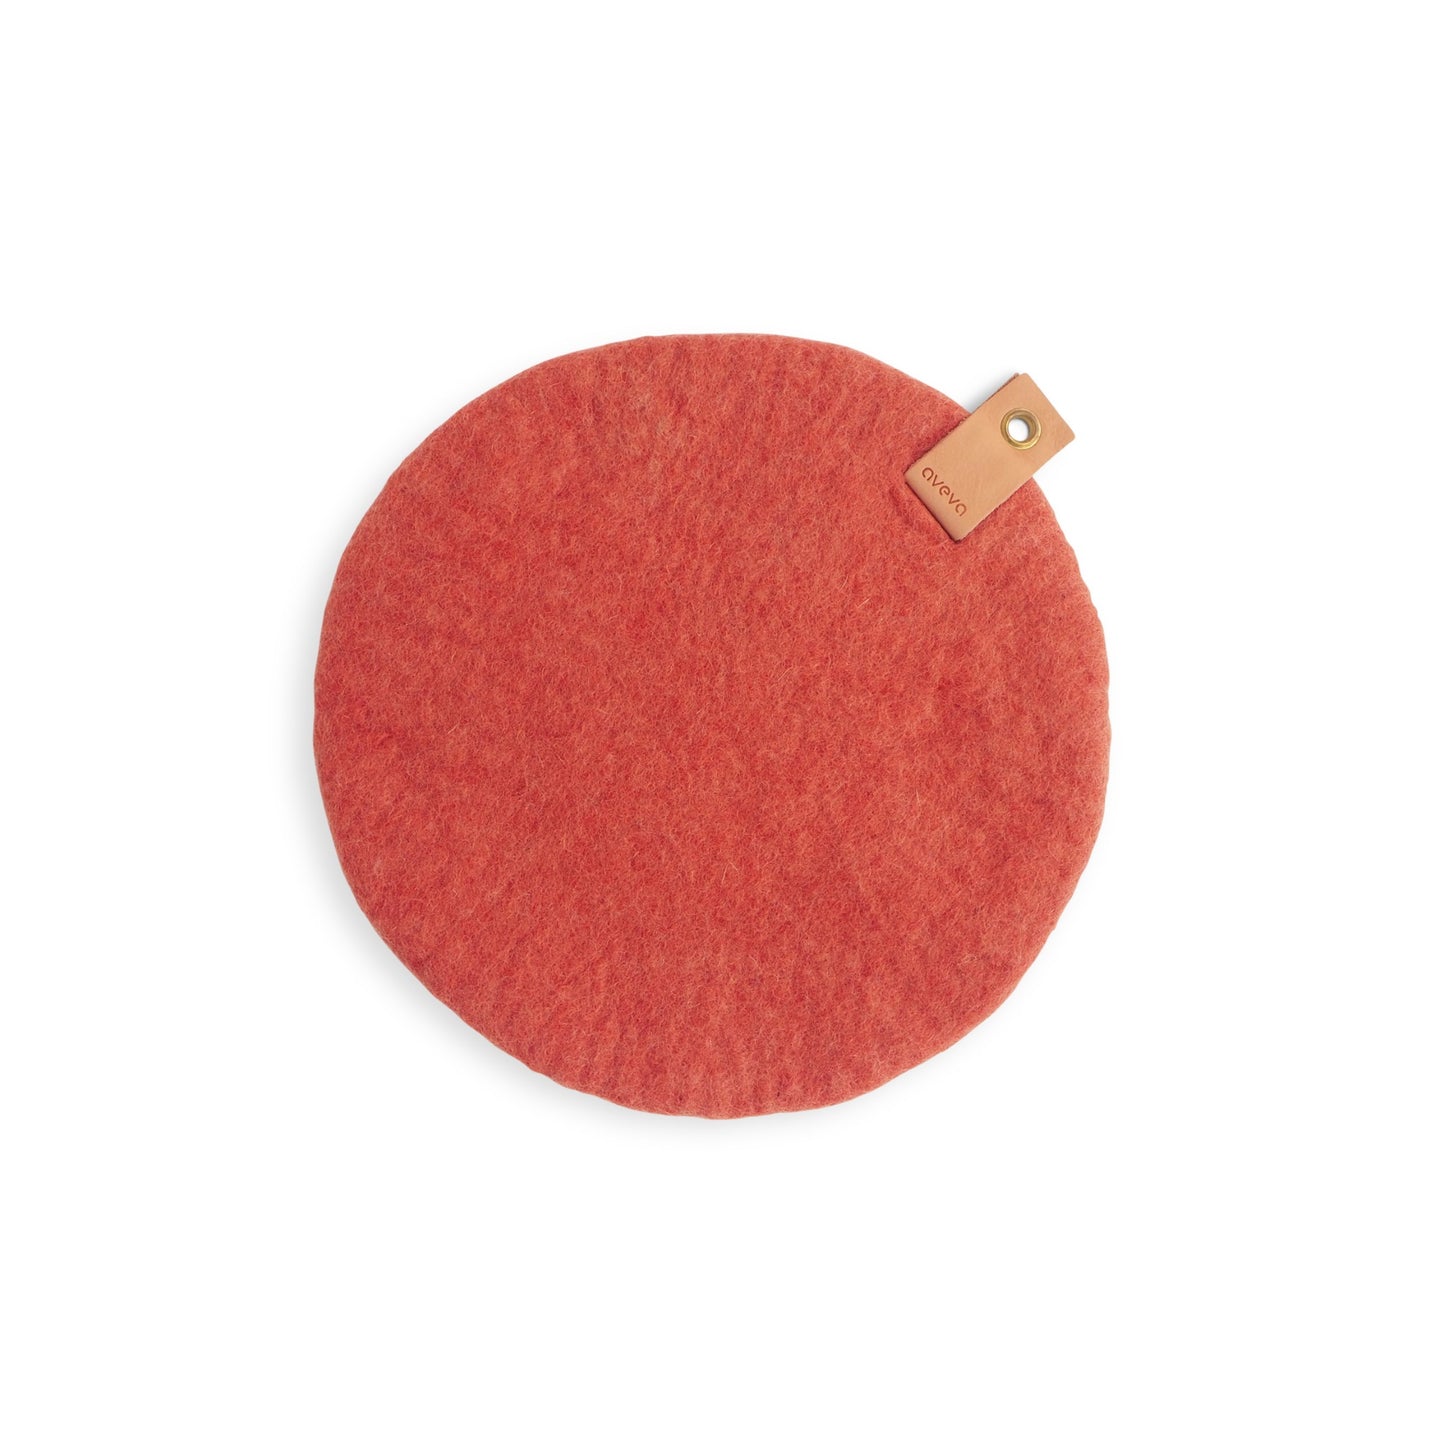 Seat Cushion with Leather Handle - Terracotta